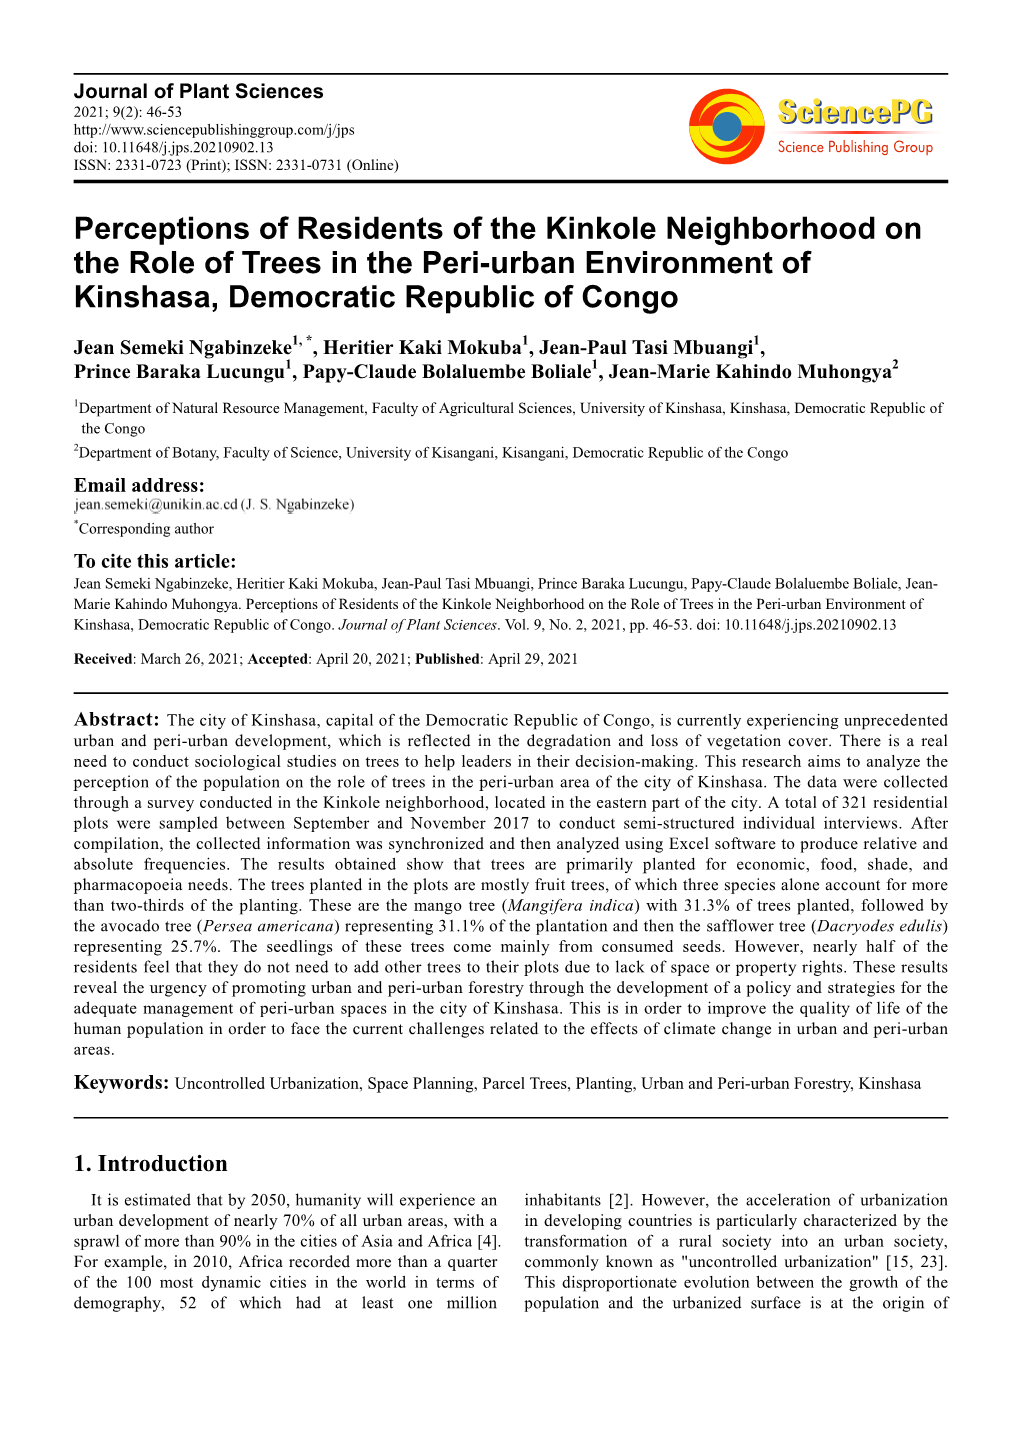 Perceptions of Residents of the Kinkole Neighborhood on the Role of Trees in the Peri-Urban Environment of Kinshasa, Democratic Republic of Congo